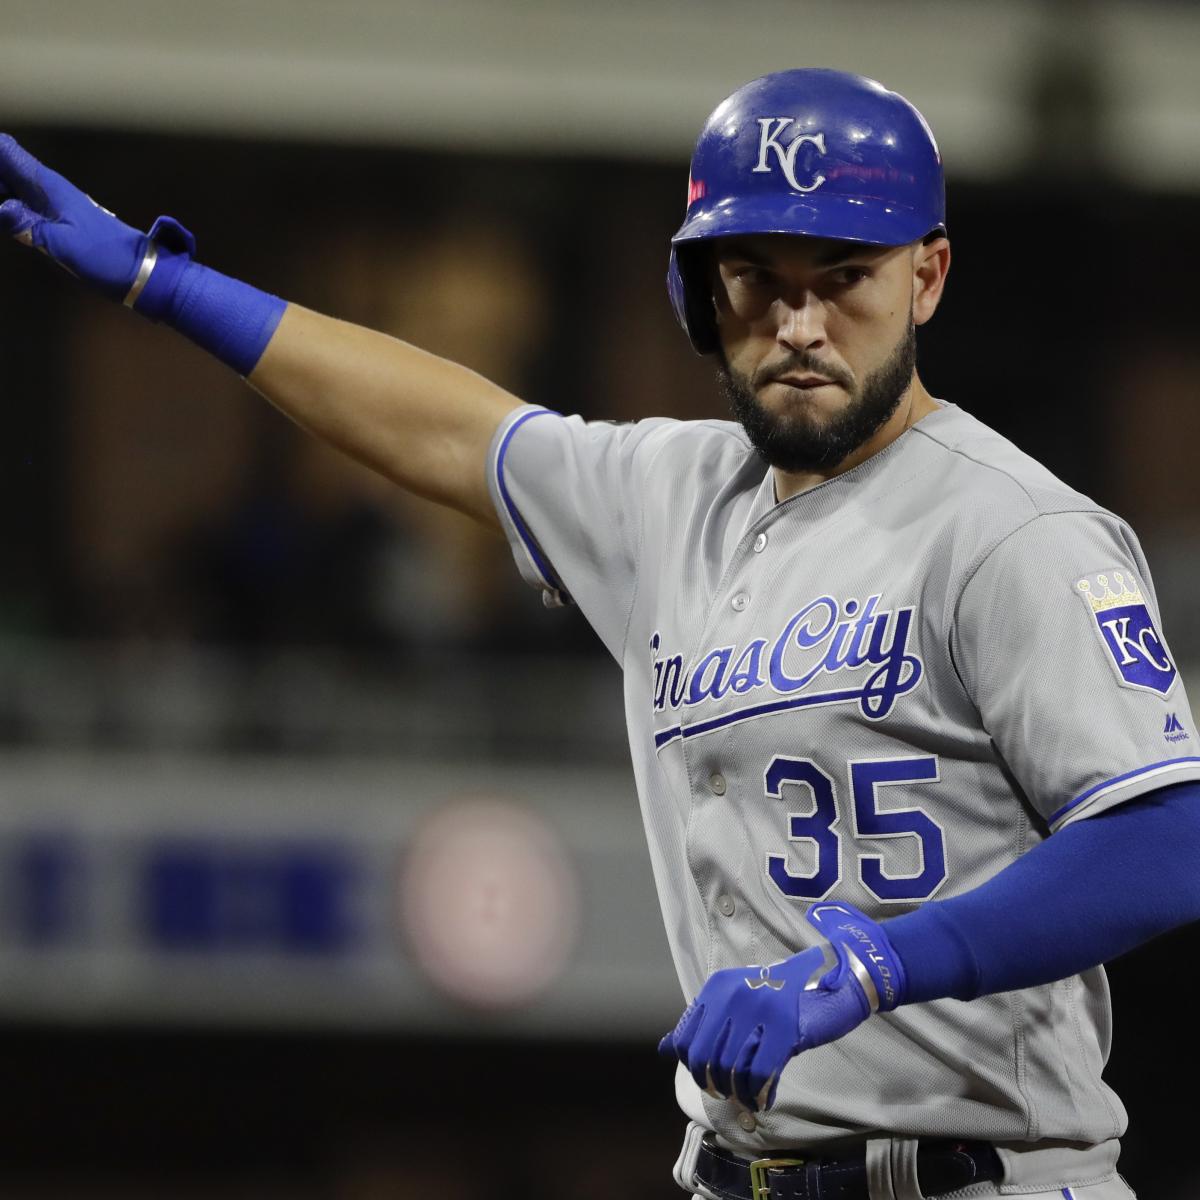 Royals Rumors: Royals could offer Eric Hosmer $100 million contract